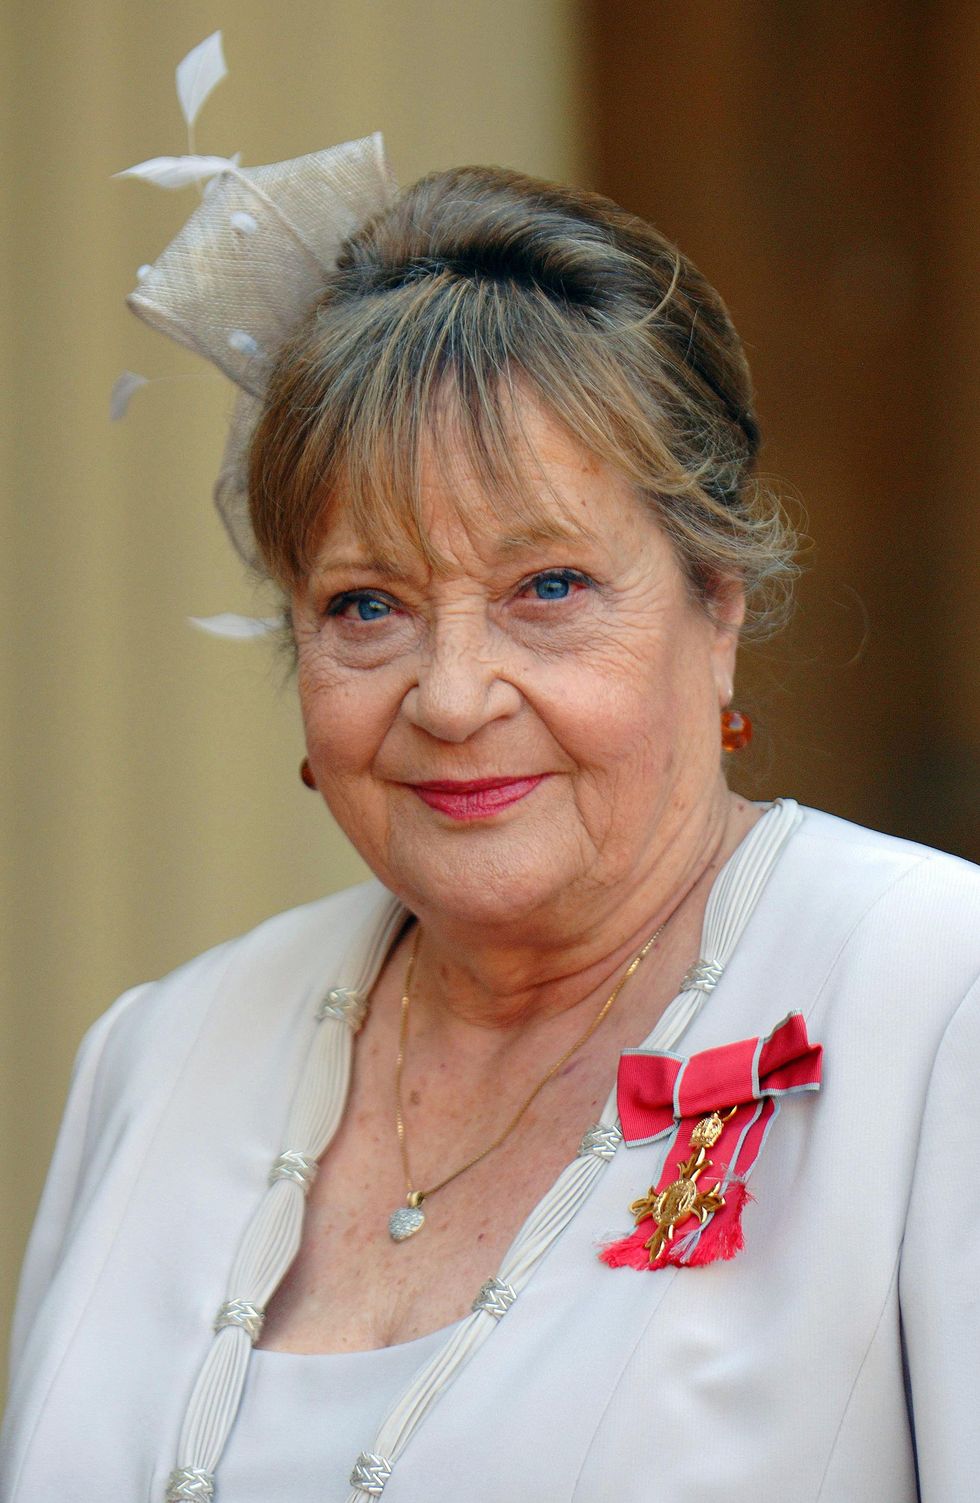 Actress Sylvia Syms has sadly died aged 89